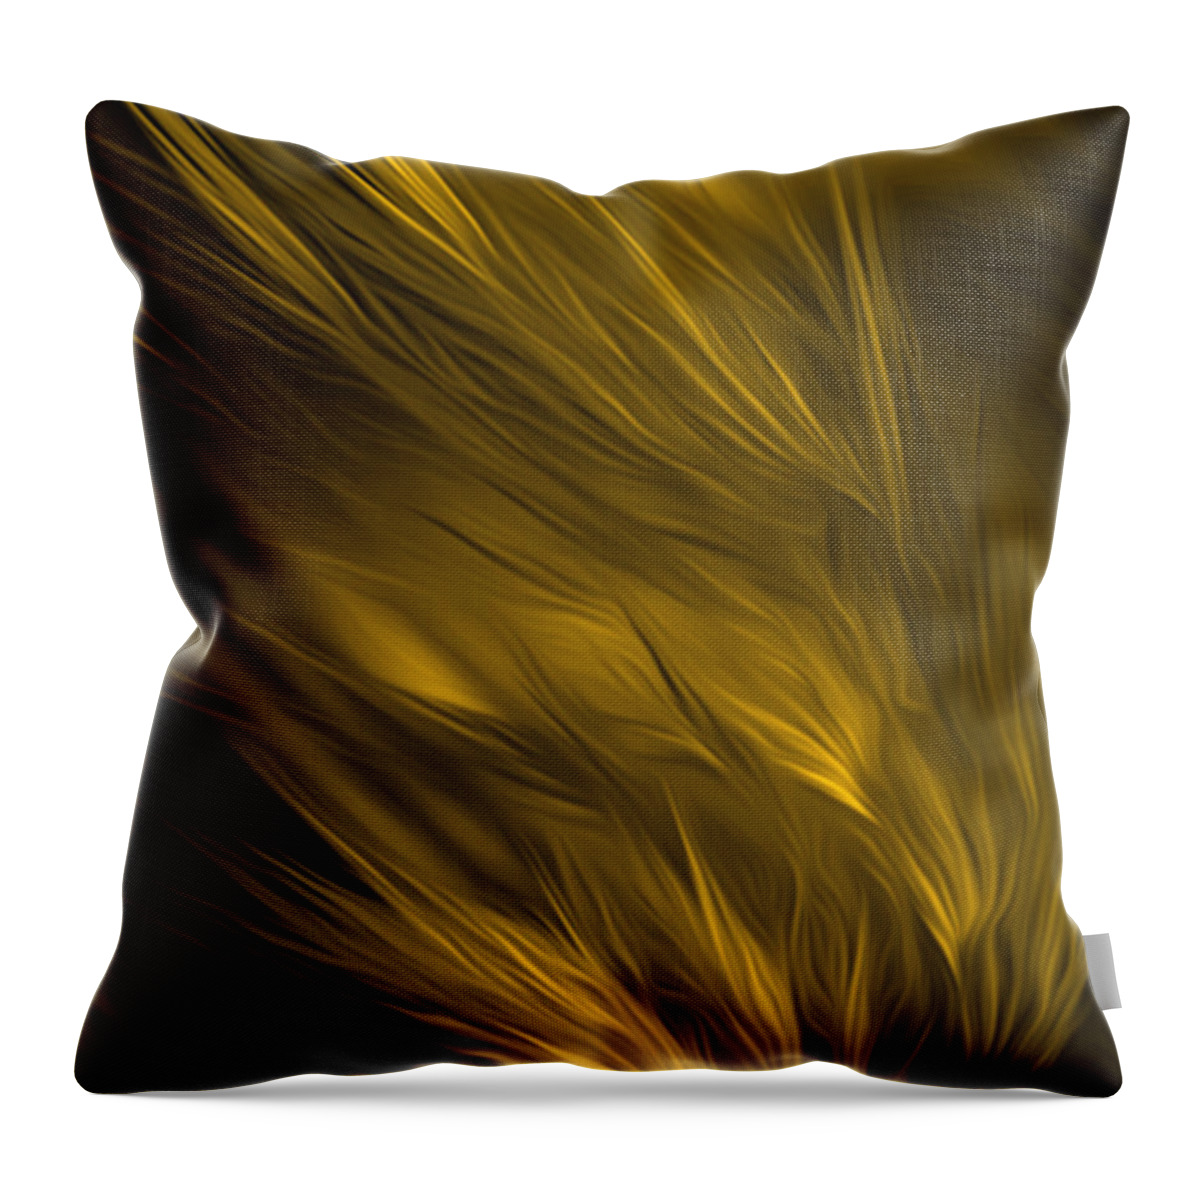 Rgiada Throw Pillow featuring the digital art Abstract art - Feathered path gold by RGiada by Giada Rossi